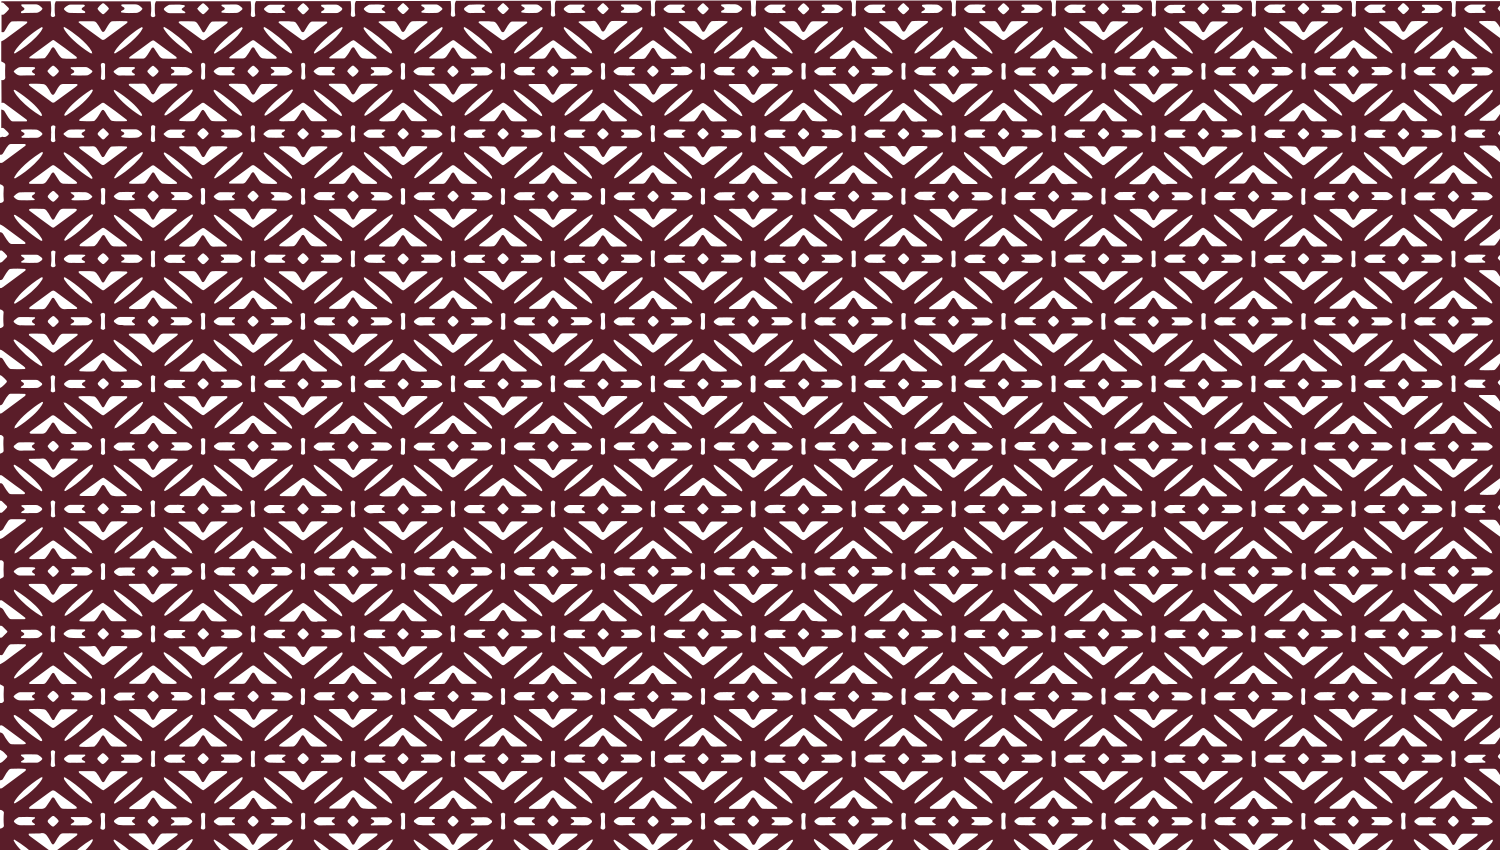 Parasoleil™ Canyon Road© pattern displayed with a burgundy color overlay